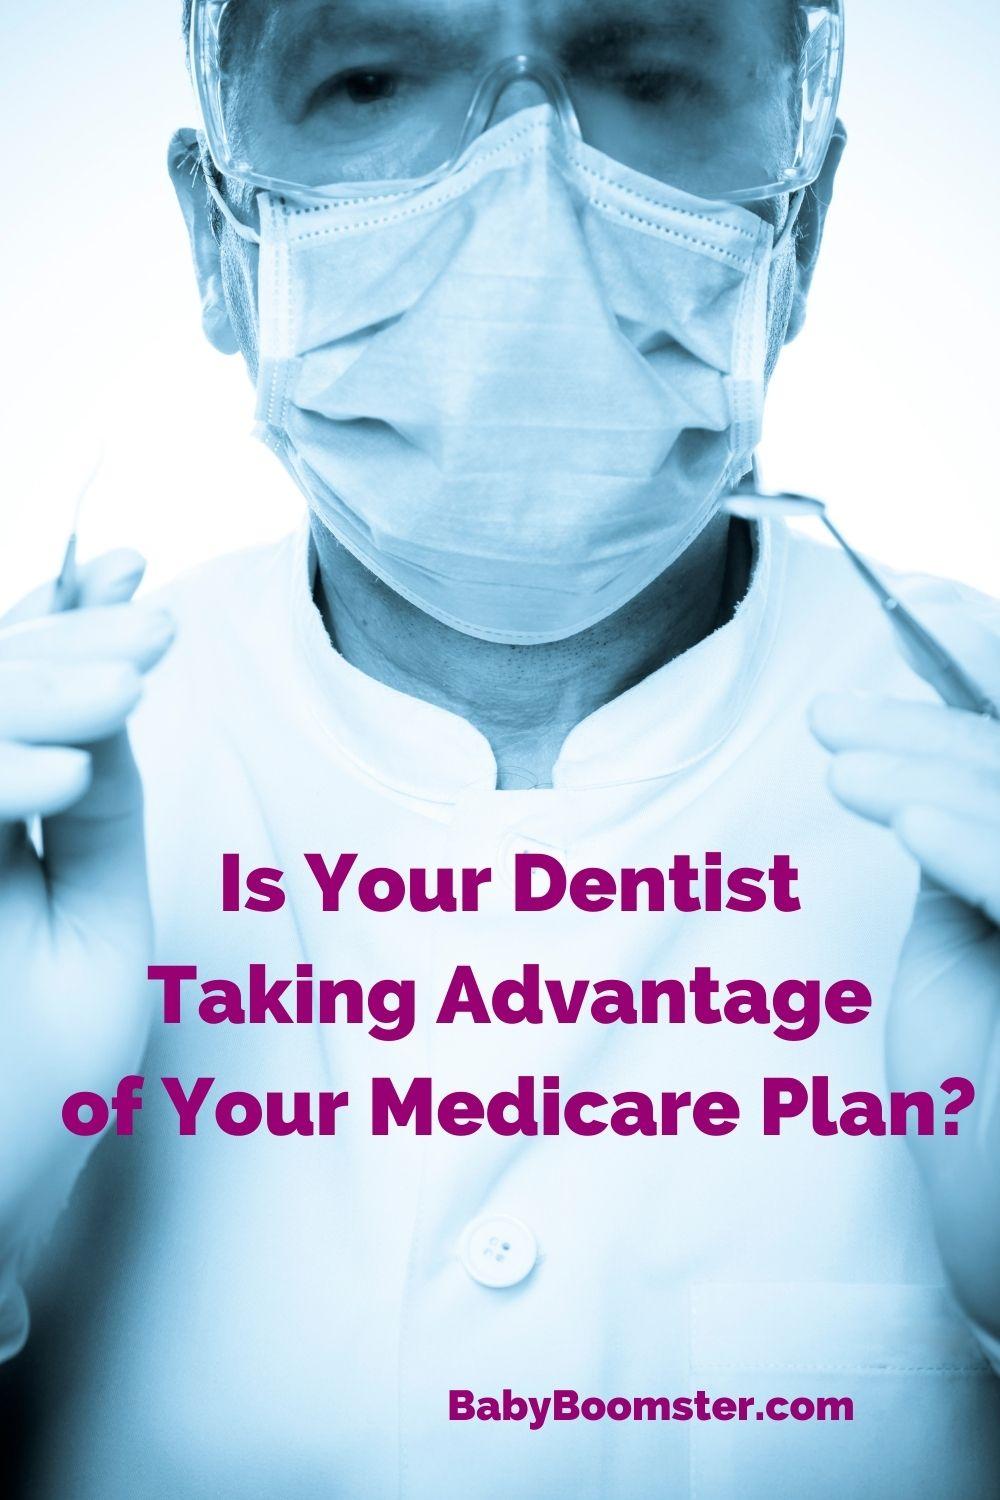 Dentists and Medicare plans